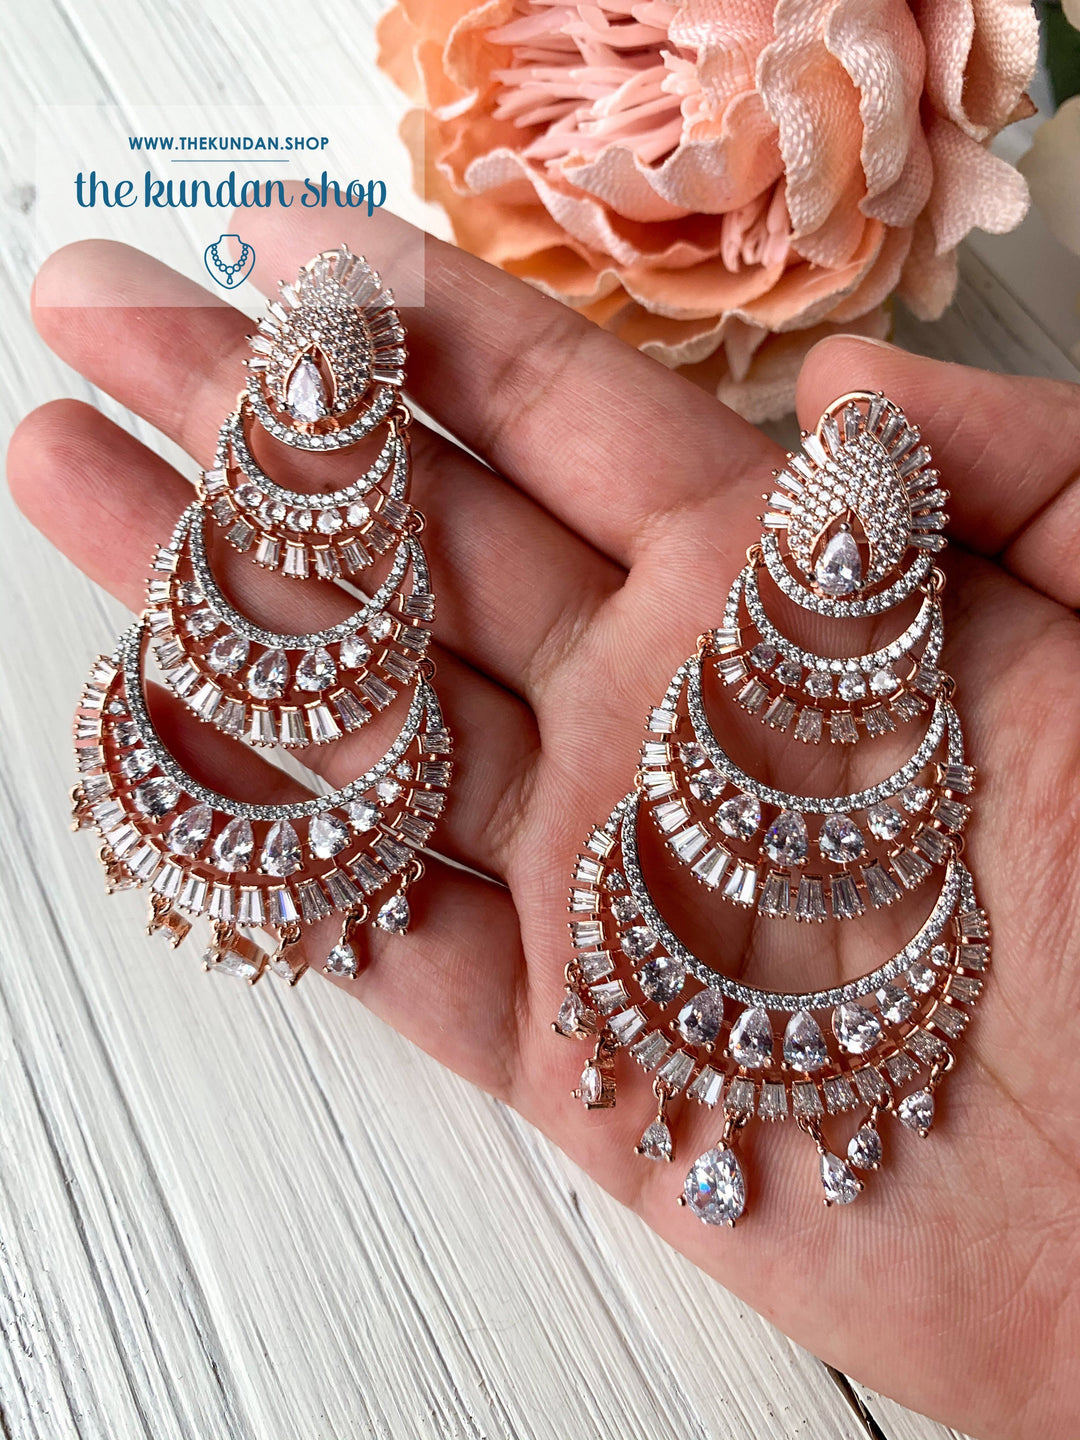 Victorious in Rose Gold, Earrings - THE KUNDAN SHOP